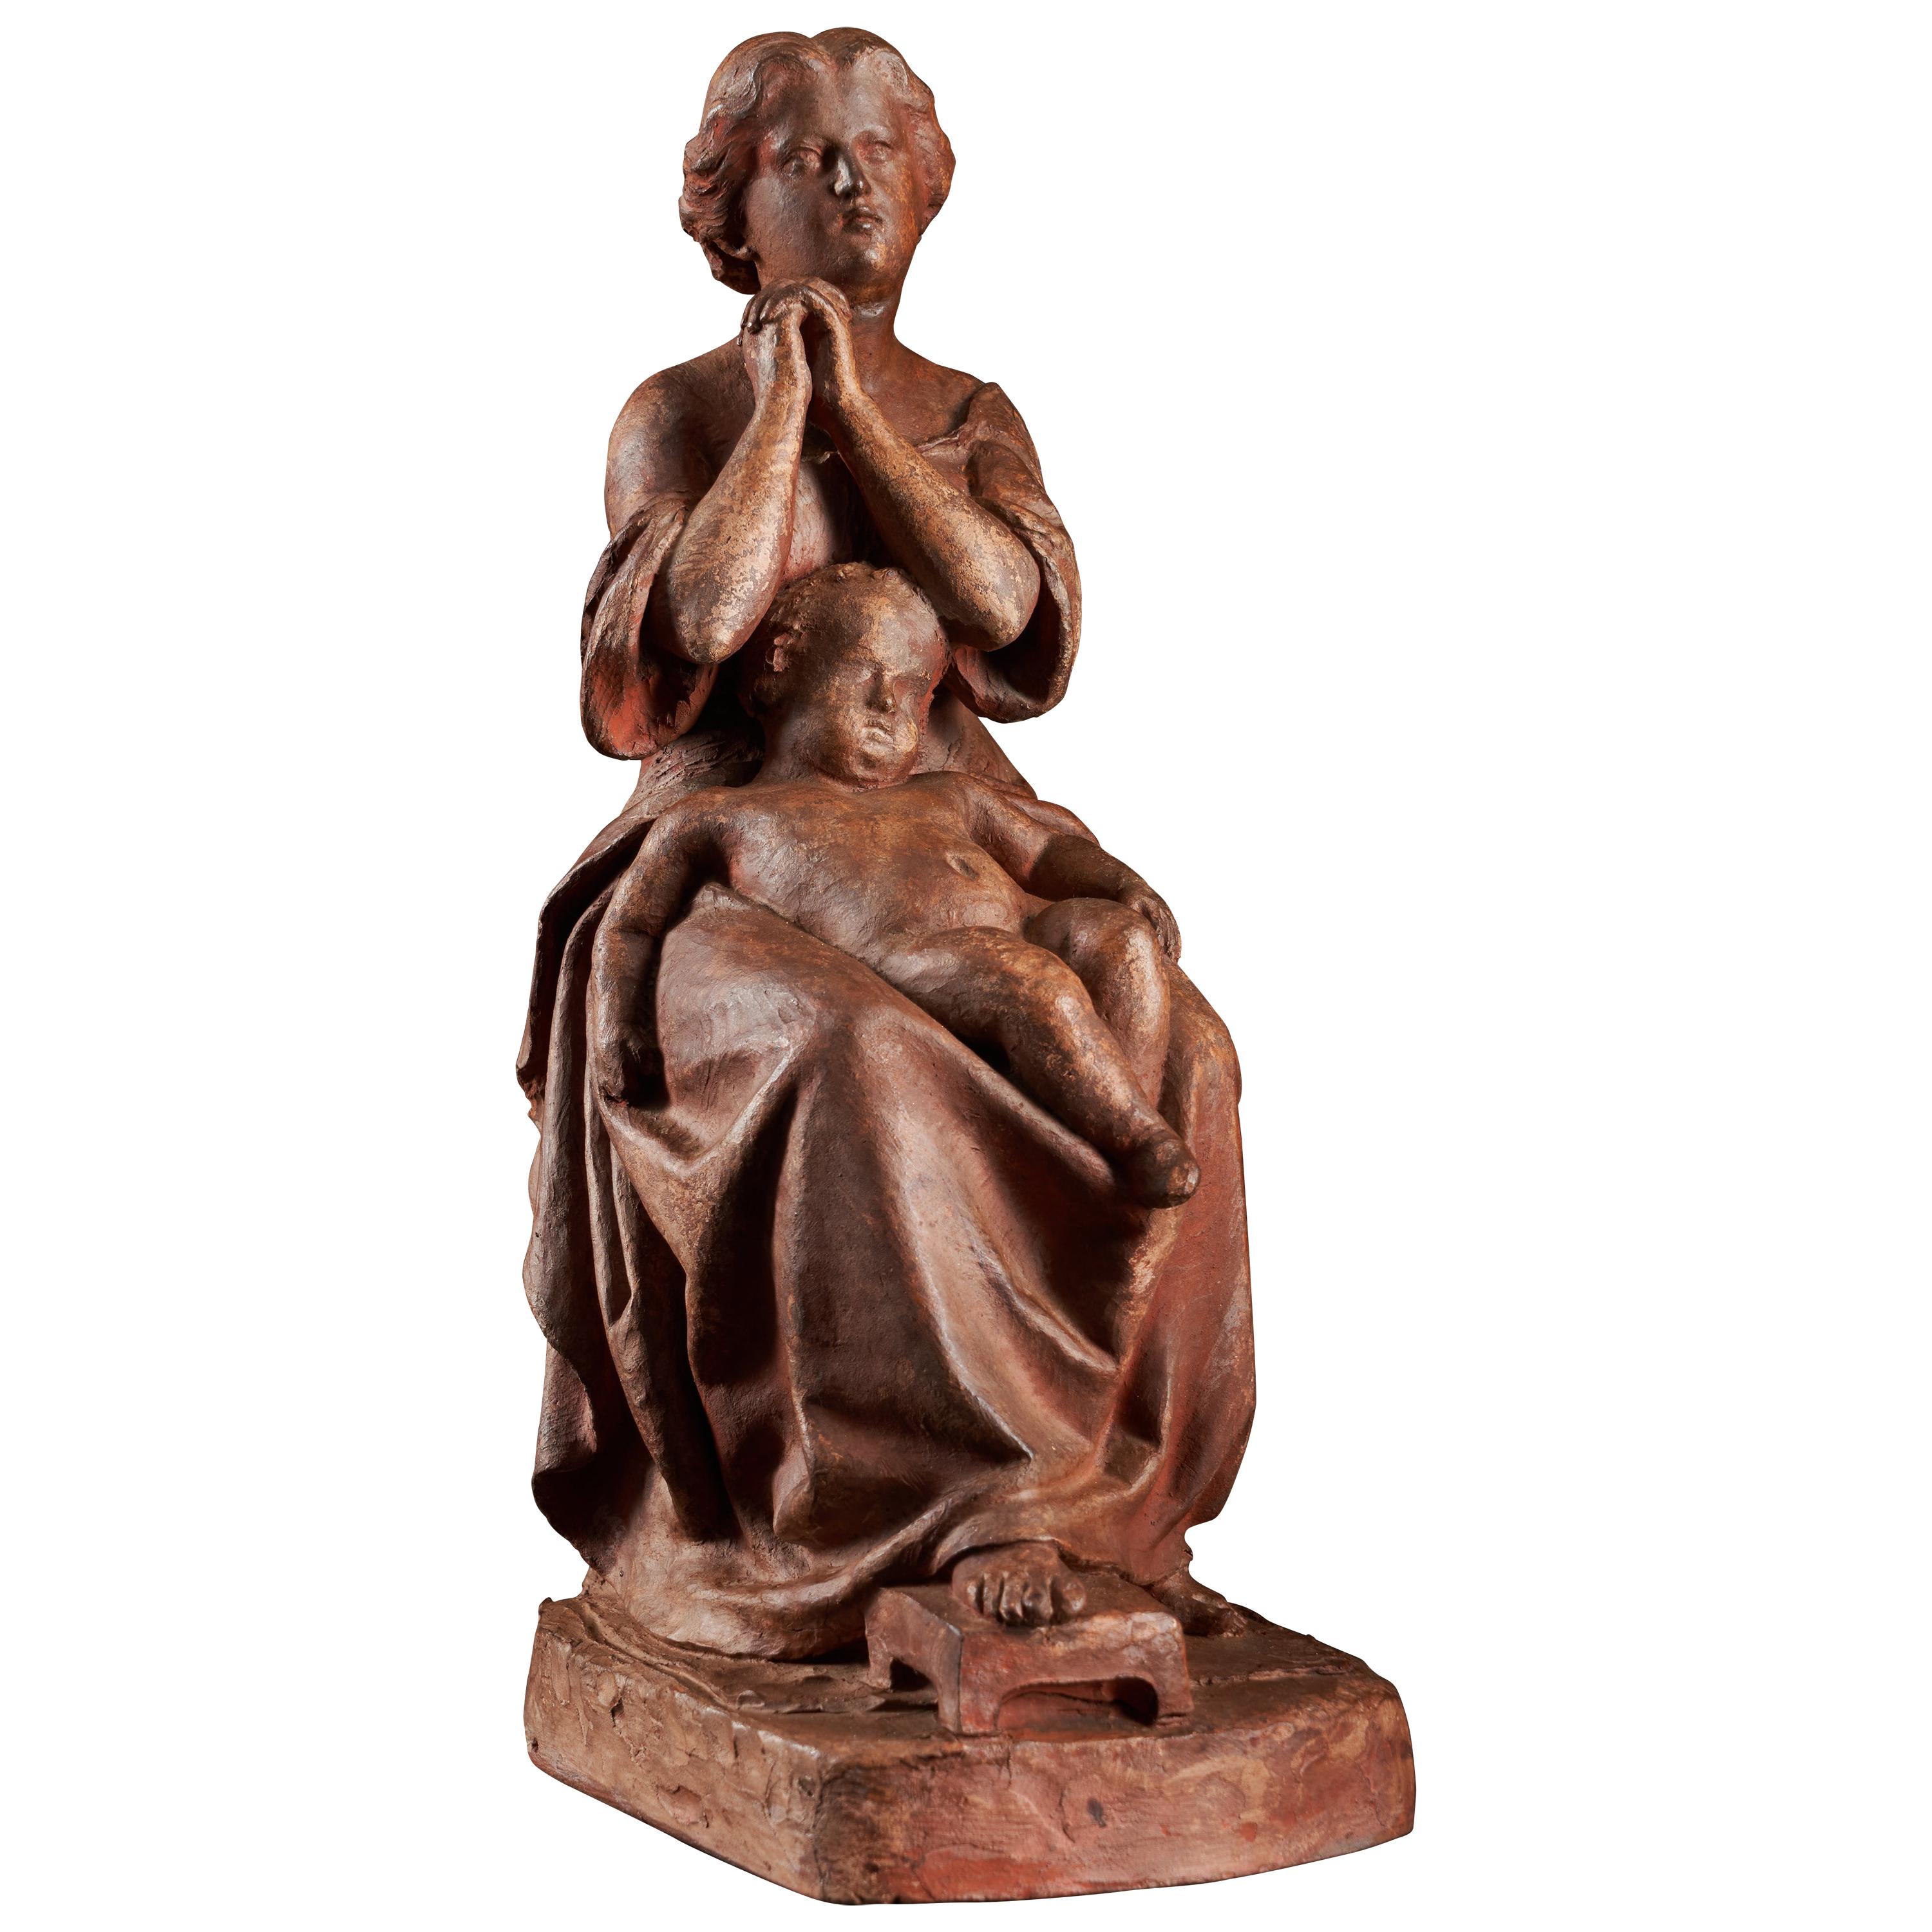 Polychromed Terracotta Signed Statue of a Woman and Child